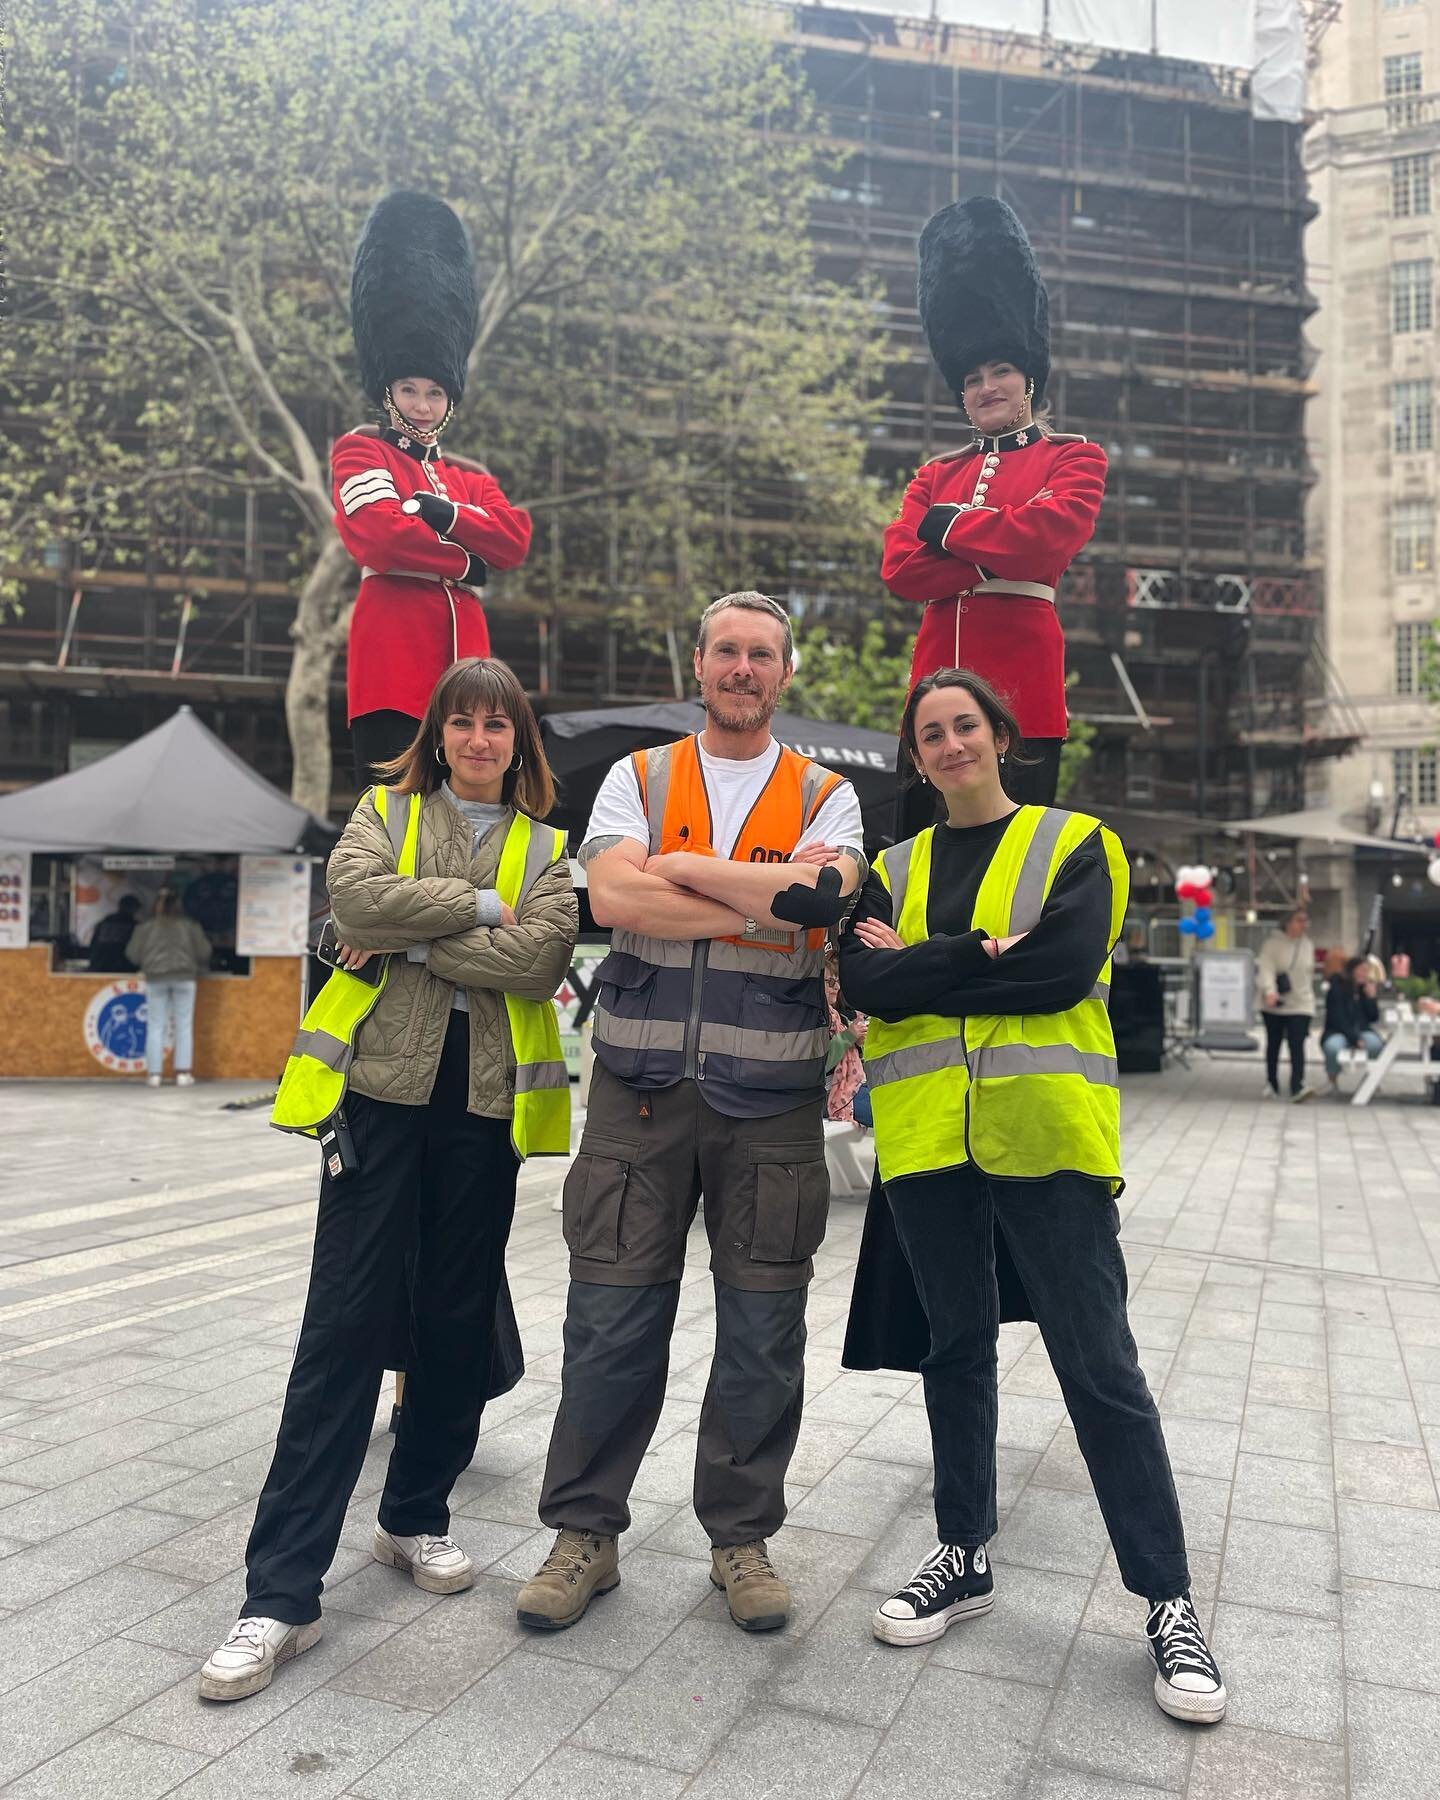 Great to be out with our Placemaking colleagues today, ensuring the safe delivery of one of many Coronation events we are working on 🦺

Northacre is a leading London property company, and it has been a pleasure working with them to celebrate such a 